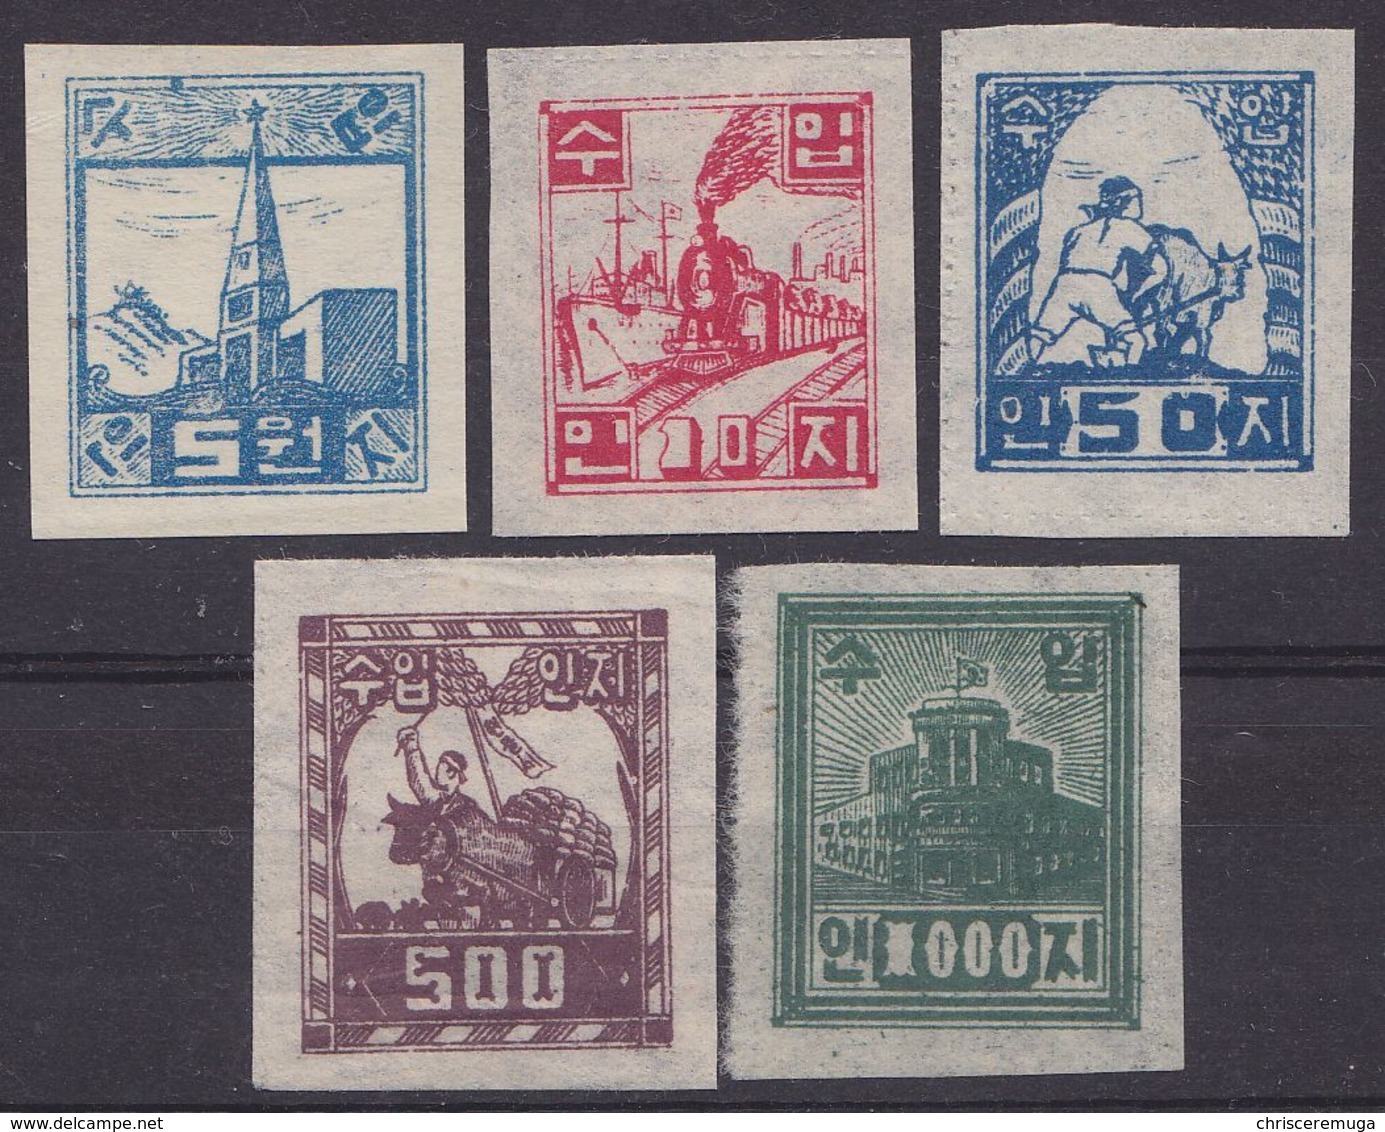 NORTH KOREA RUSSIA 1950 Early Revenues 5w To 1000w, Rouletted Or Imperf. Chinese Intervention Korean War - Sibérie Et Extrême Orient